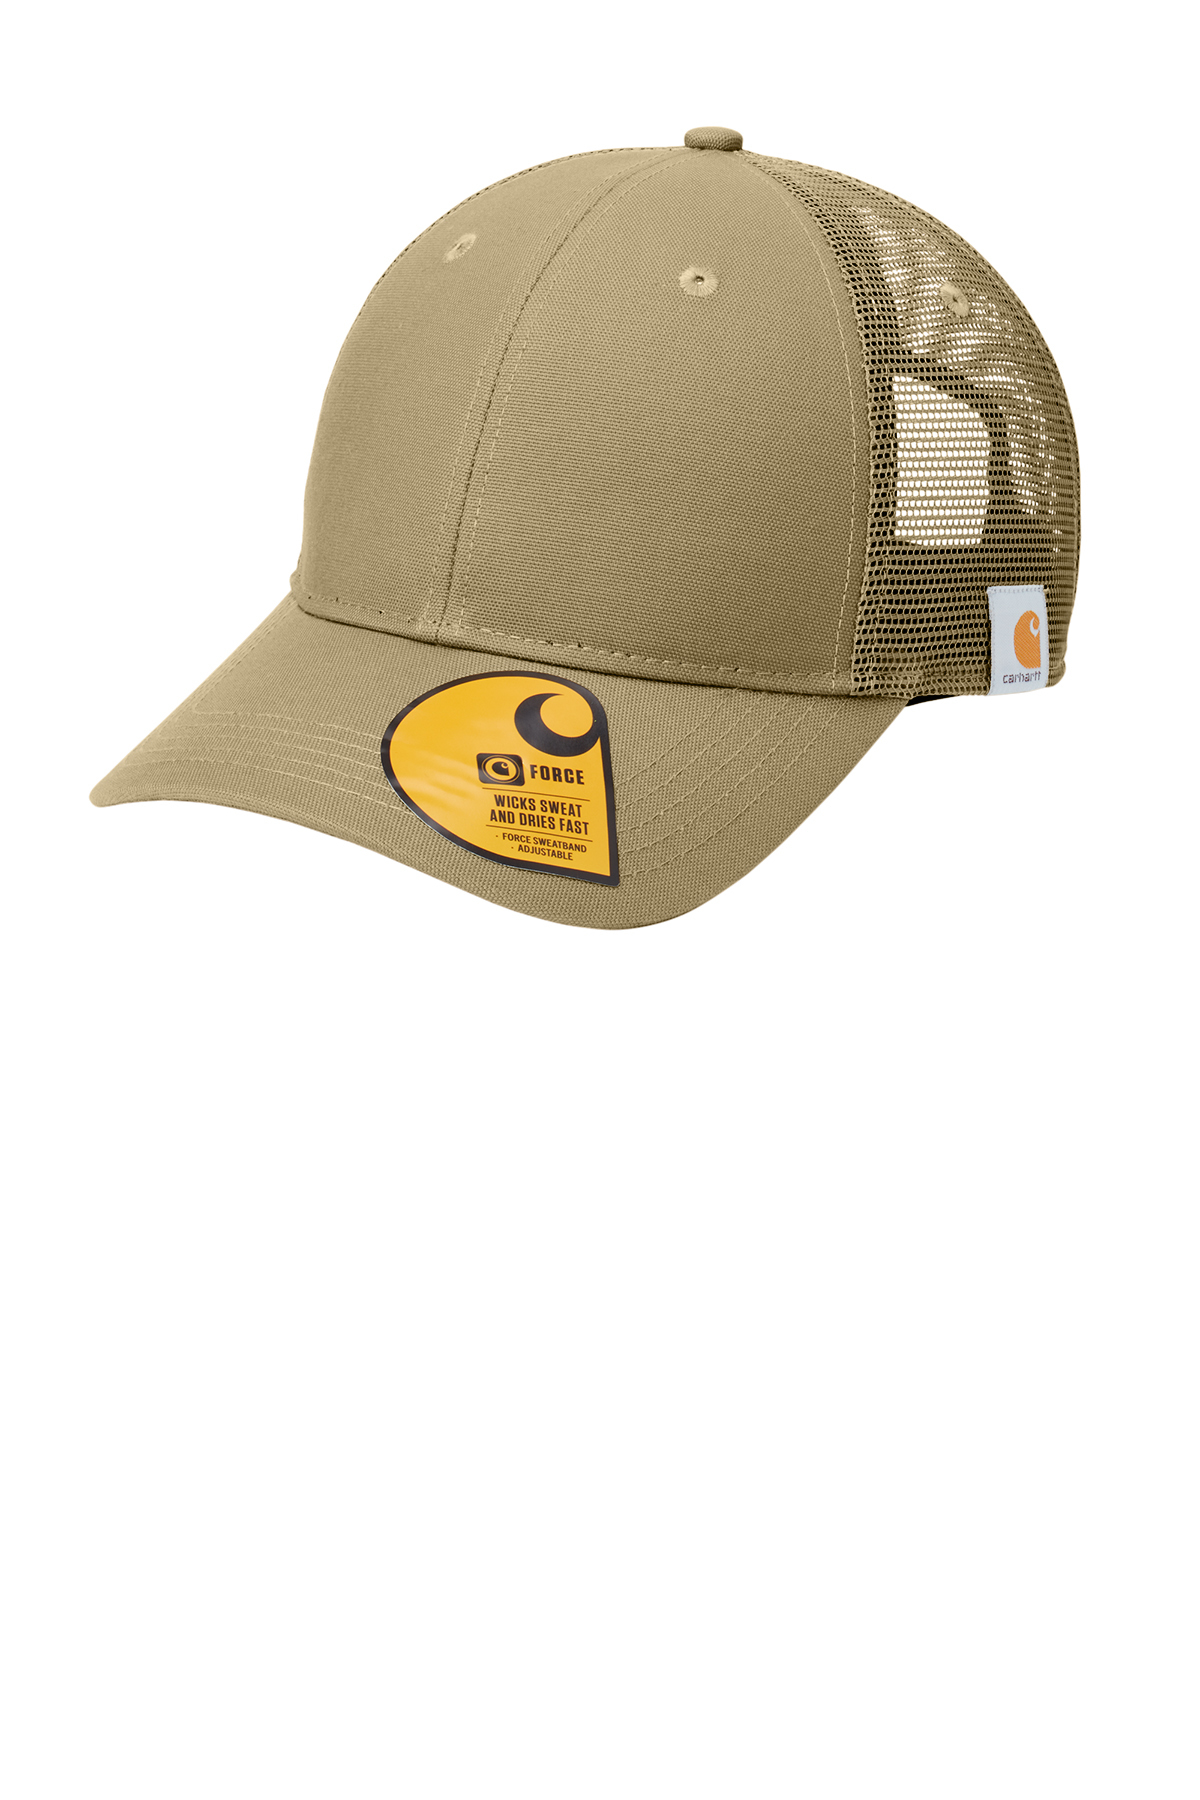 Carhartt Rugged Professional Series Cap | Product | Company Casuals